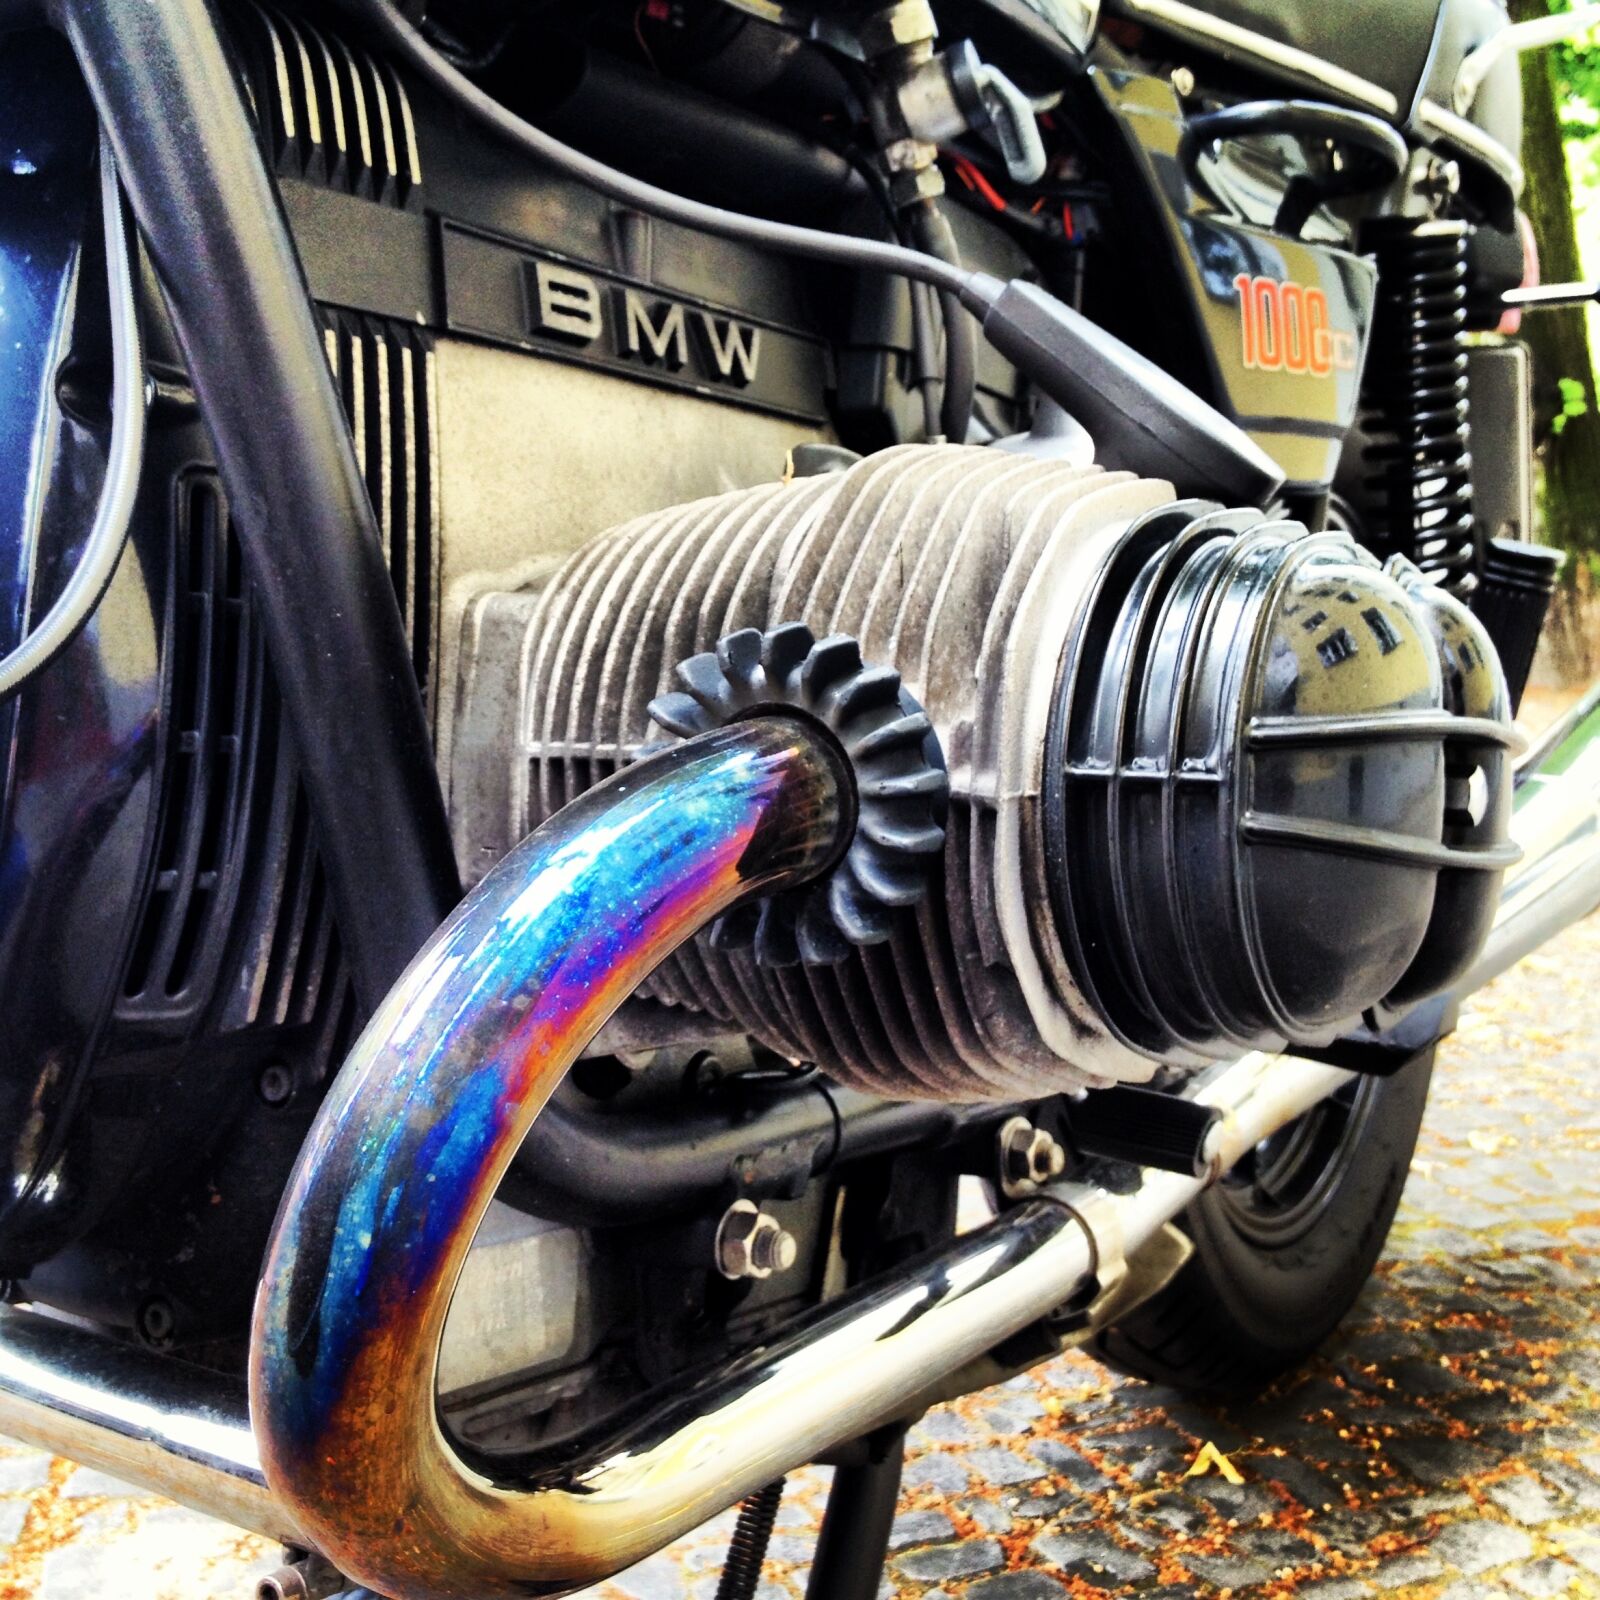 Apple iPhone 4S sample photo. Bmw, motorcycle, exhaust photography